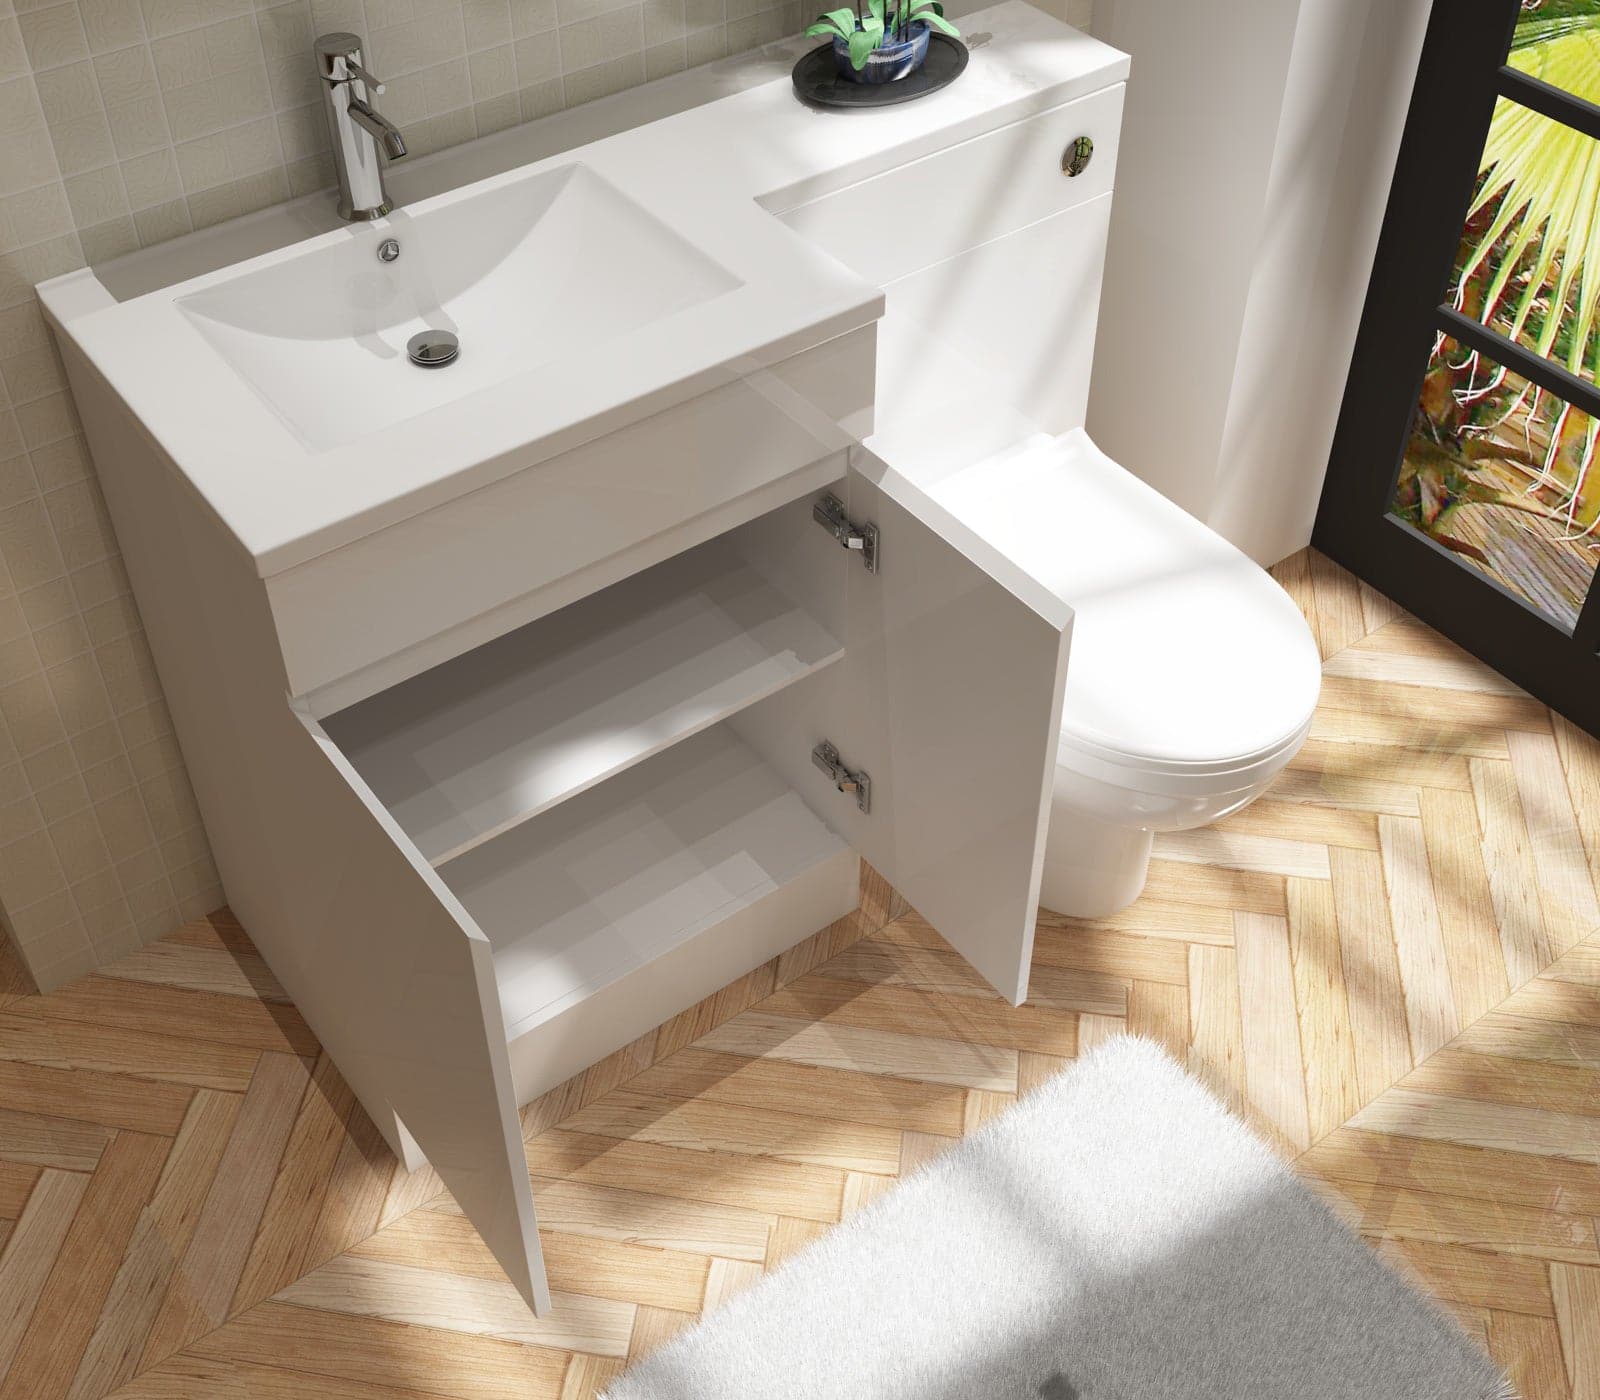 Gamma L Shape Vanity & WC Unit - LH - Gloss White. Stylish bathroom furniture set with toilet, ideal for modern UK homes. Buy now at Bathroom4Less.